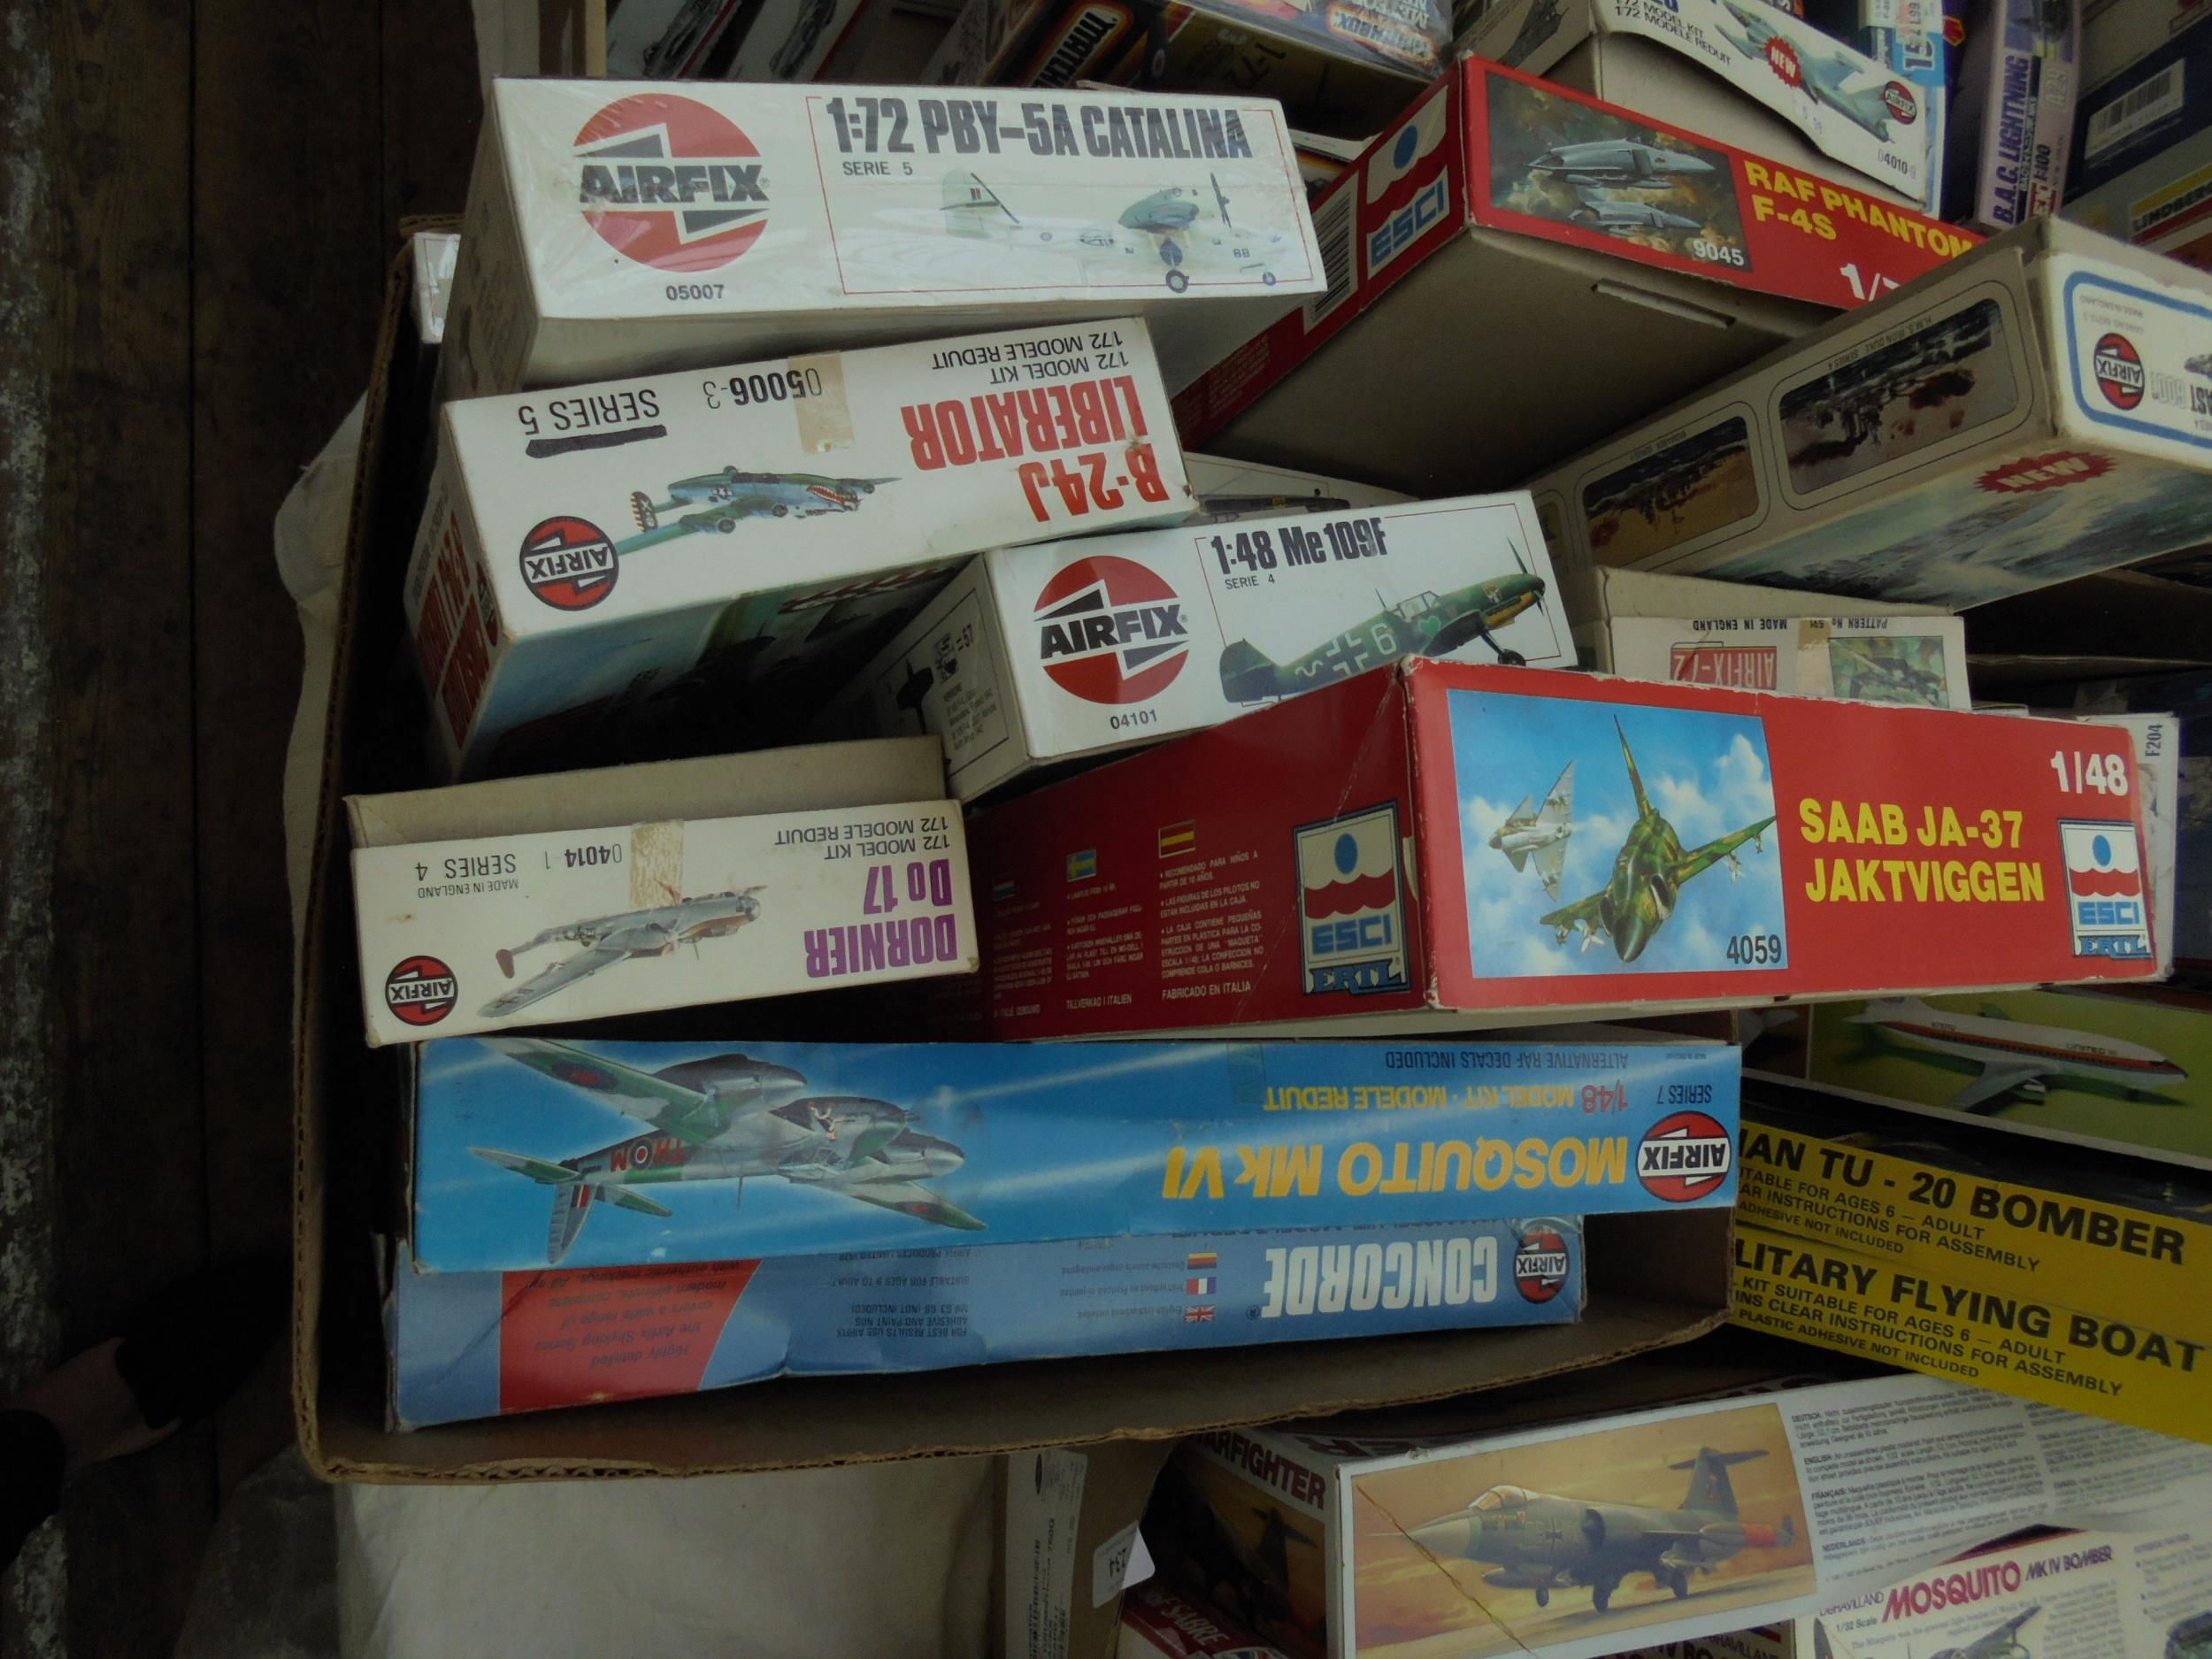 12 models for construction by Airfix and Ertl in original boxes